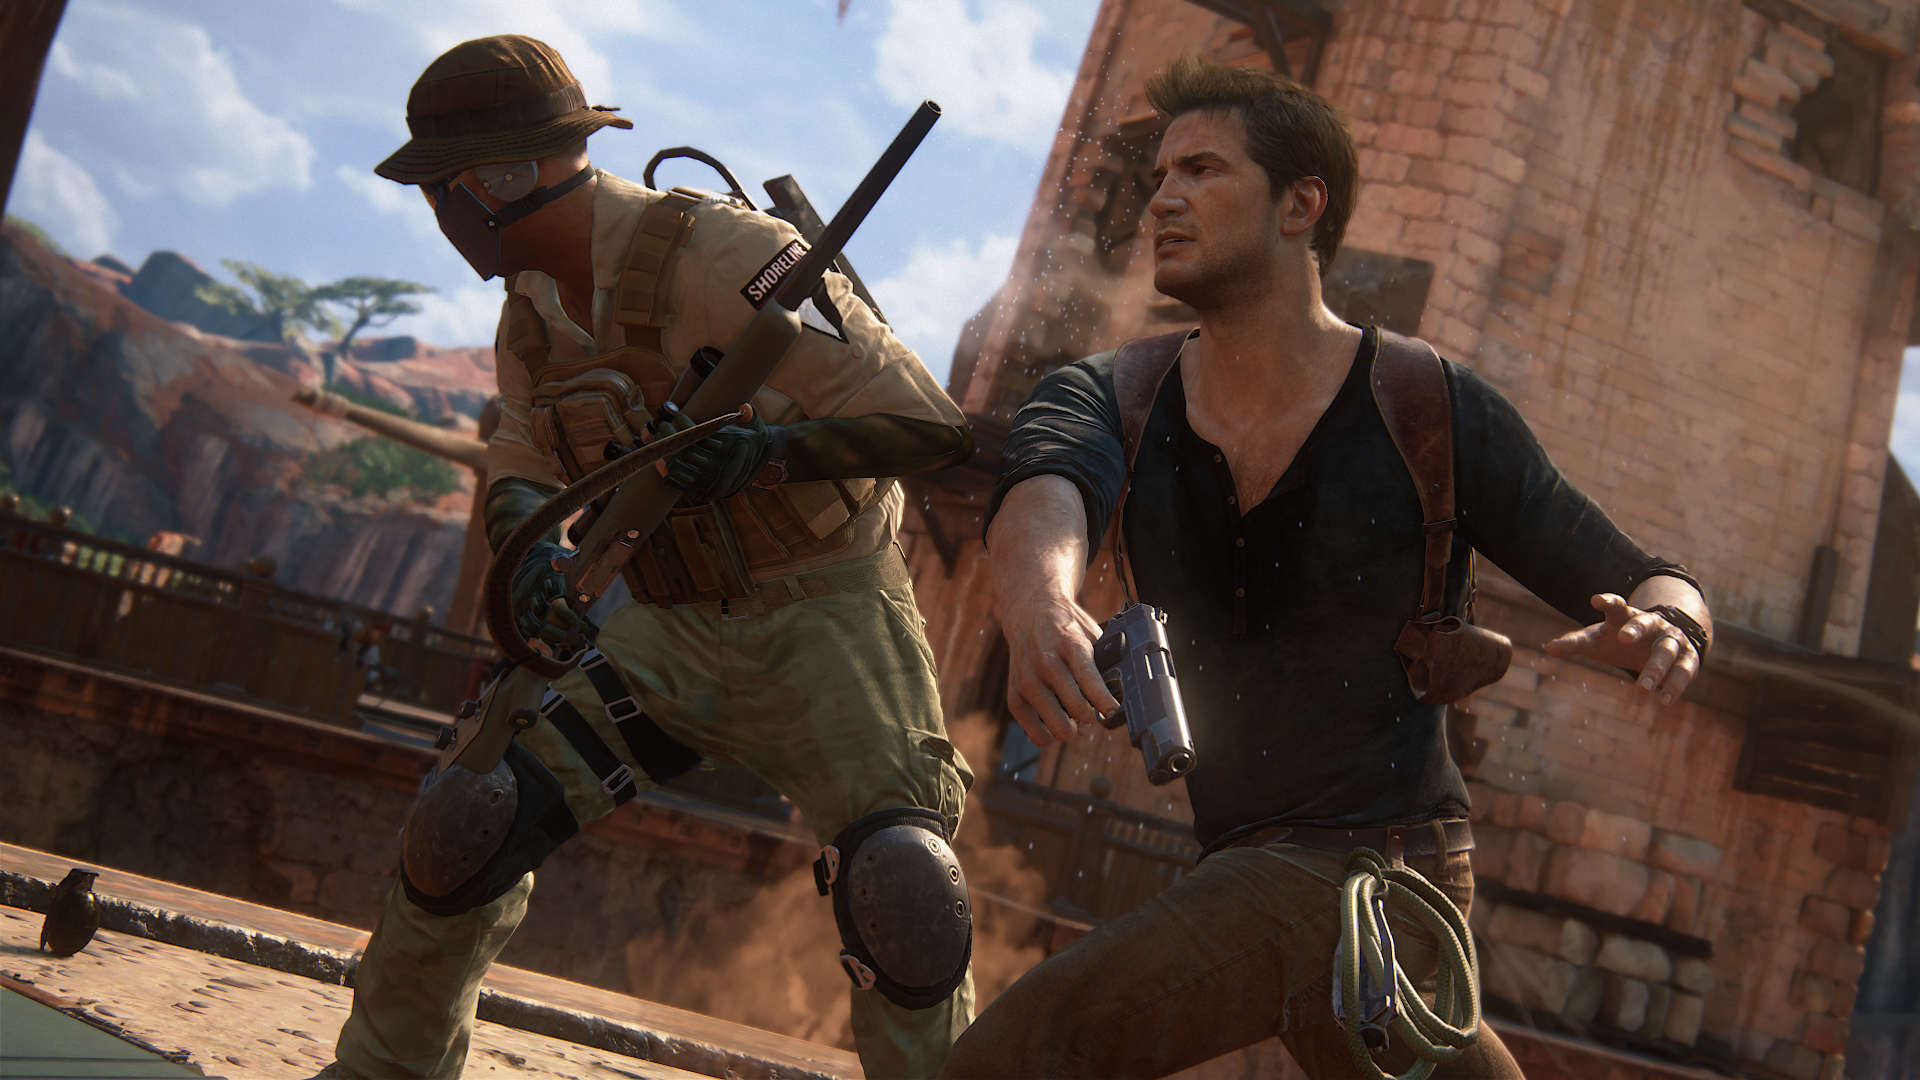 best of video games on X: nathan drake — uncharted 4: a thief's